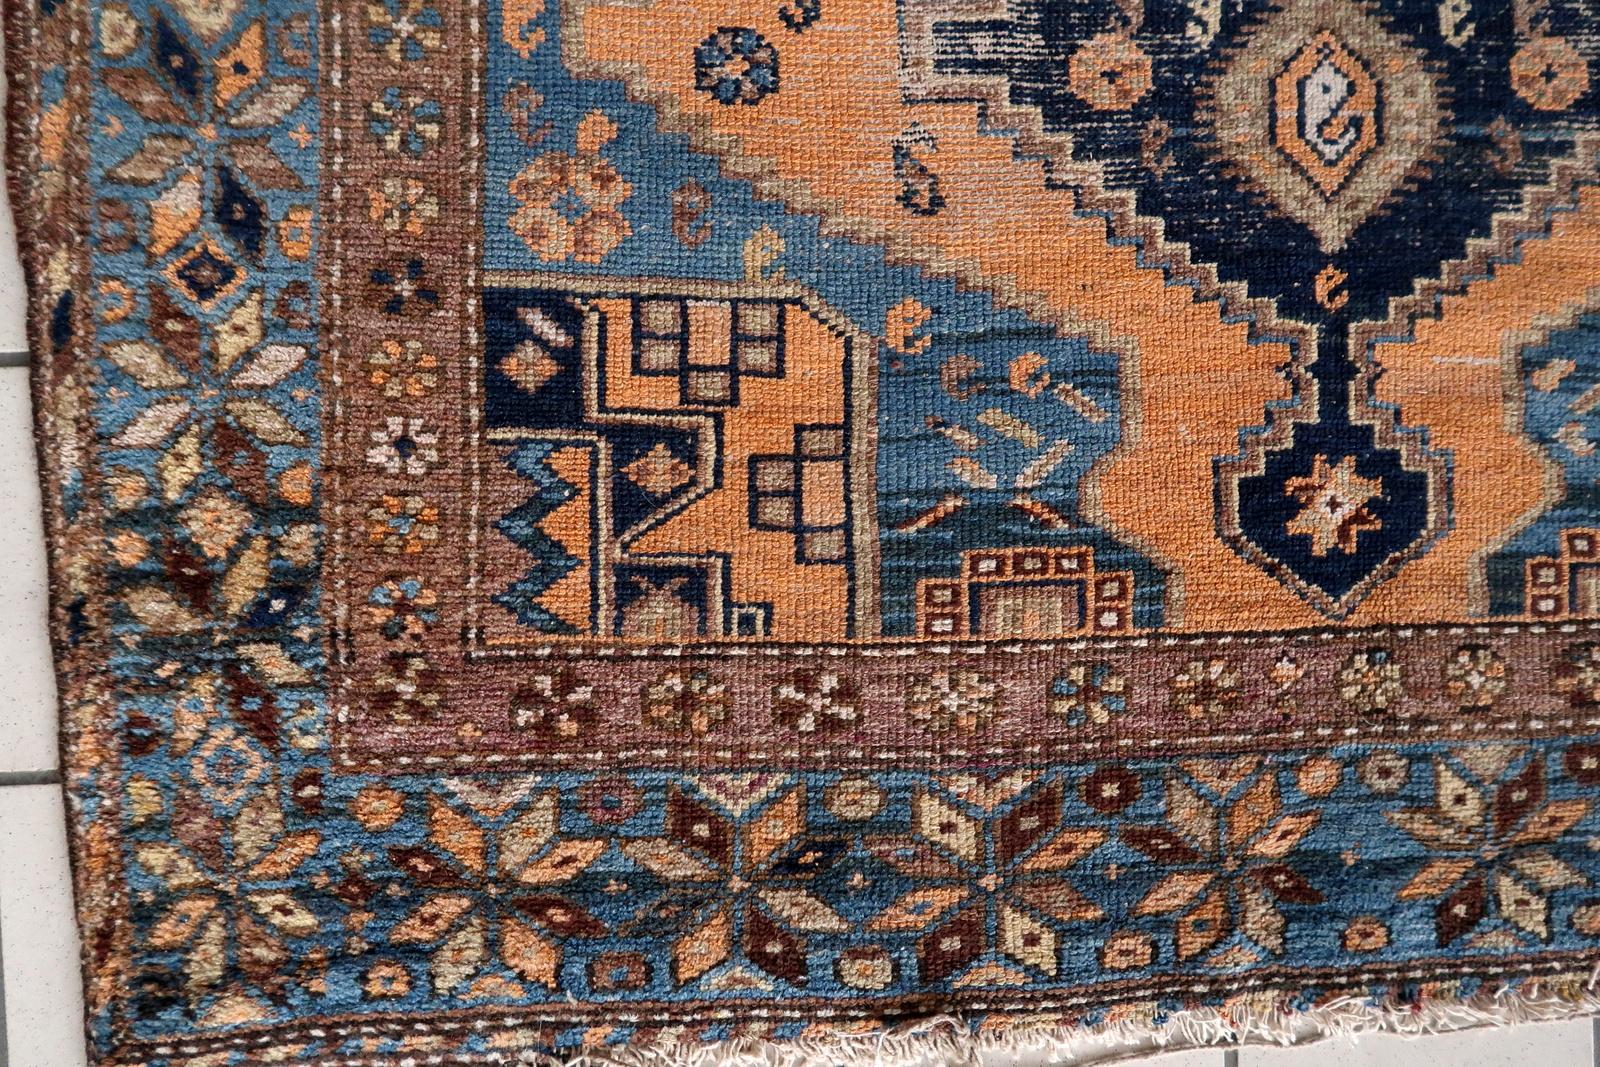 Handmade Antique Caucasian Shirvan Rug:

Design and Aesthetics:
This rug hails from the 1900s, a testament to its enduring quality and historical significance.
Measuring at 4.1’ x 6.2’, it’s a compact yet impactful piece.
The intricate design